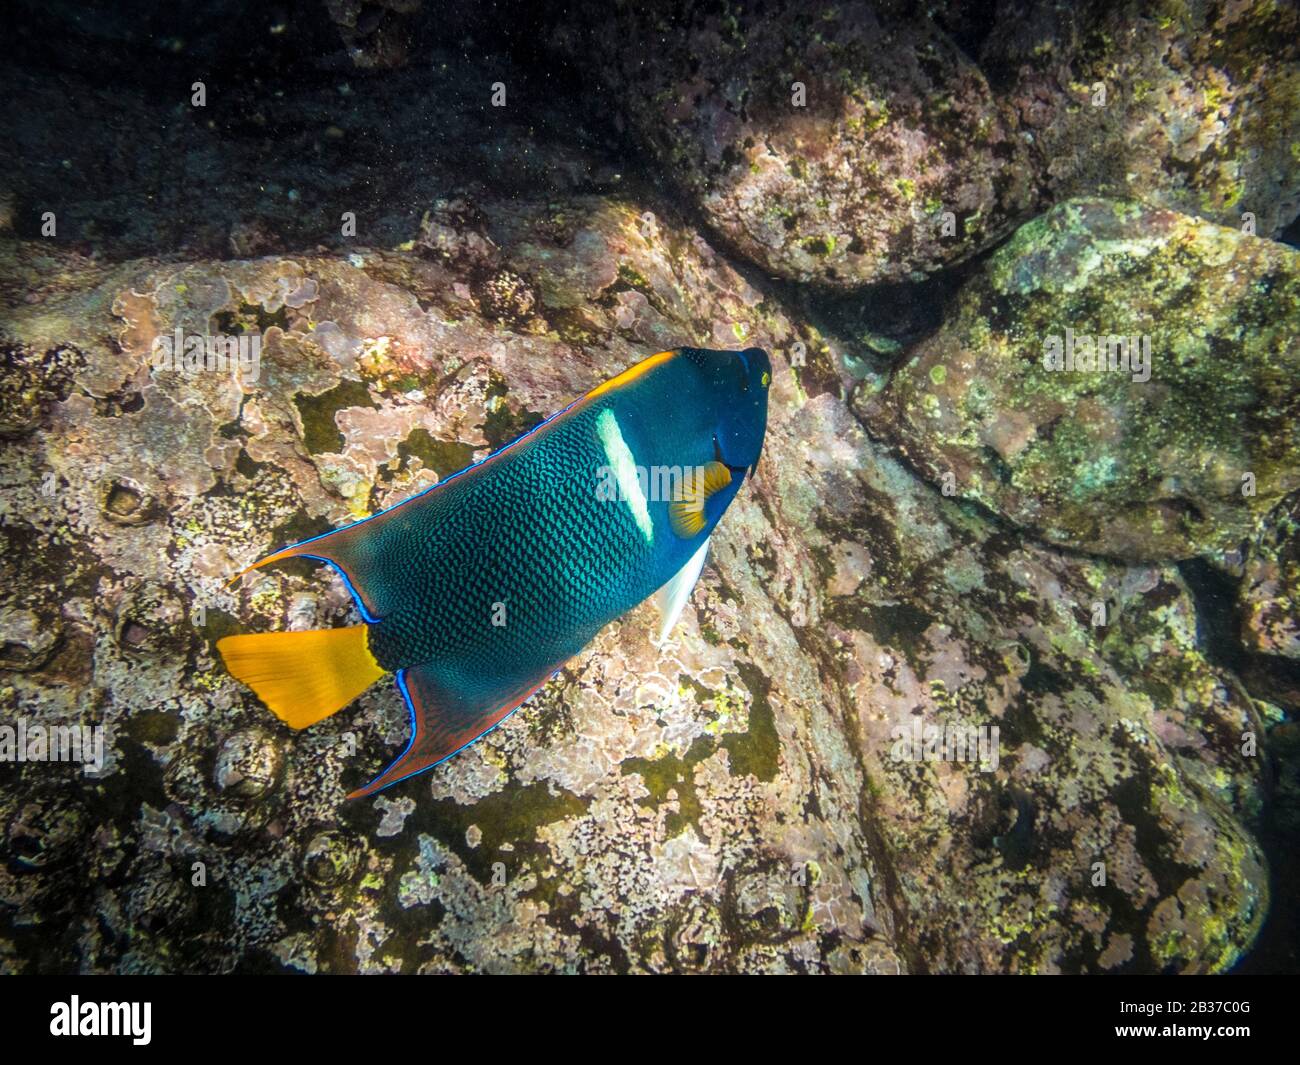 Ecuador, Galapagos archipelago, listed as World Heritage by UNESCO, Santa Fé Island, Diving around Bottle Island, here a White-barge Angelfish (Holacanthus passer) Stock Photo